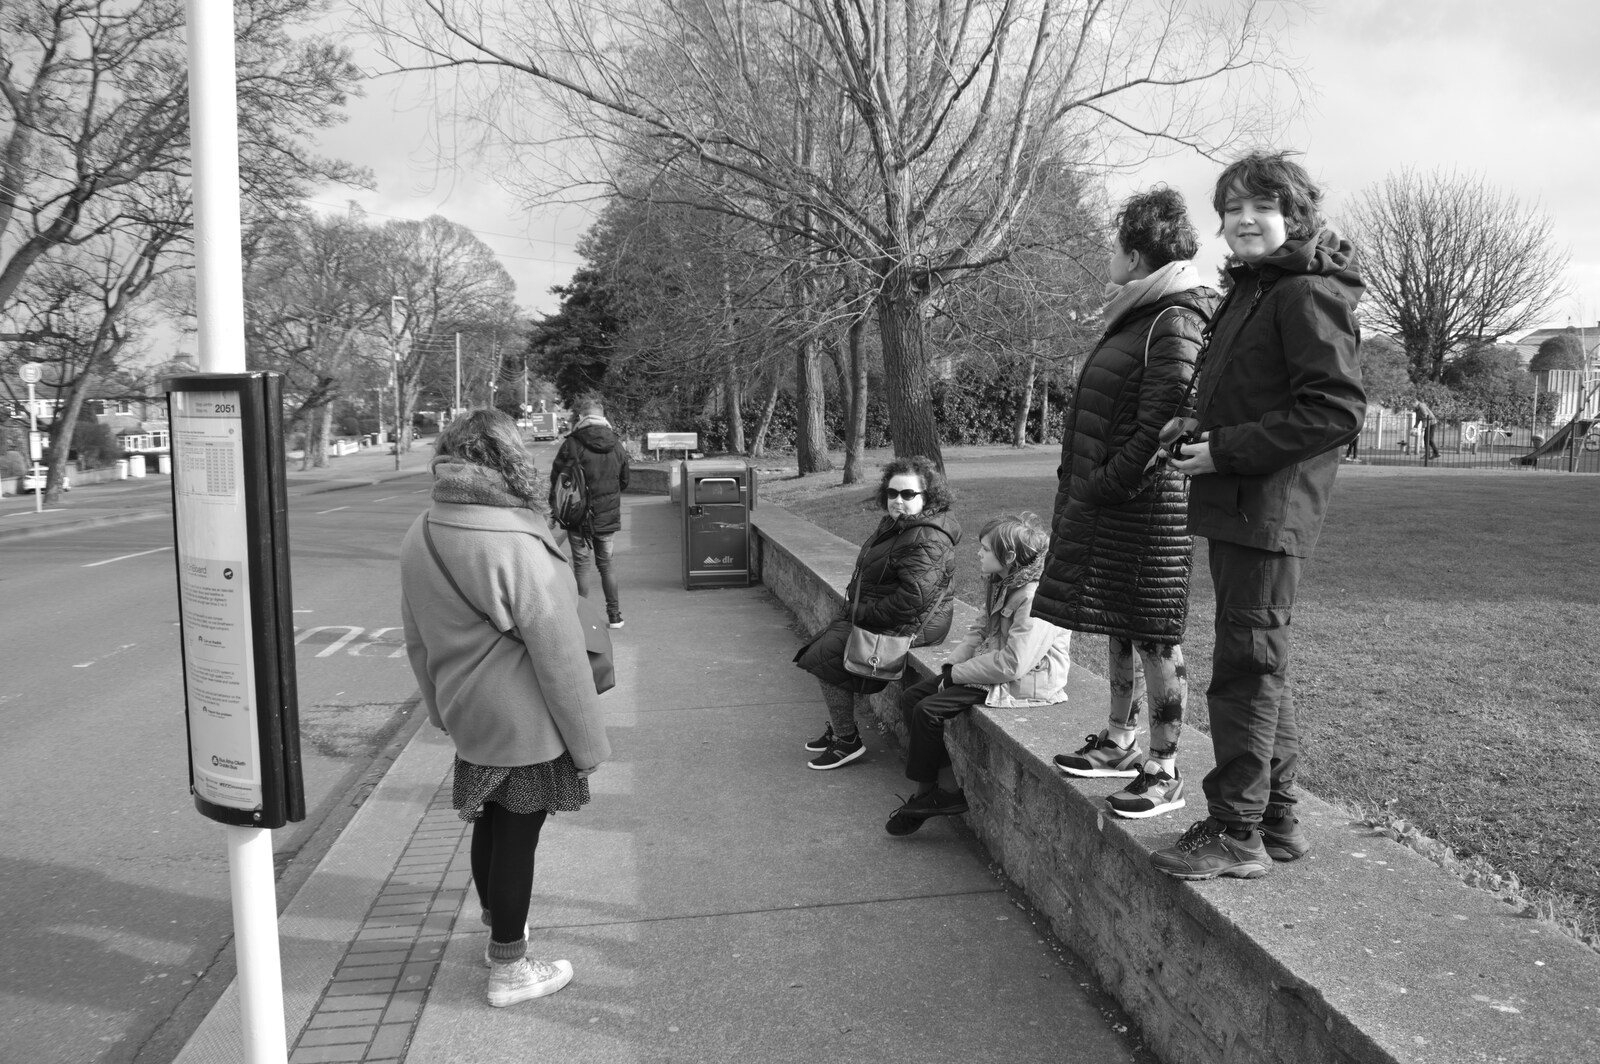 The Dead Zoo, Dublin, Ireland - 17th February 2023: We hang around waiting for the bus